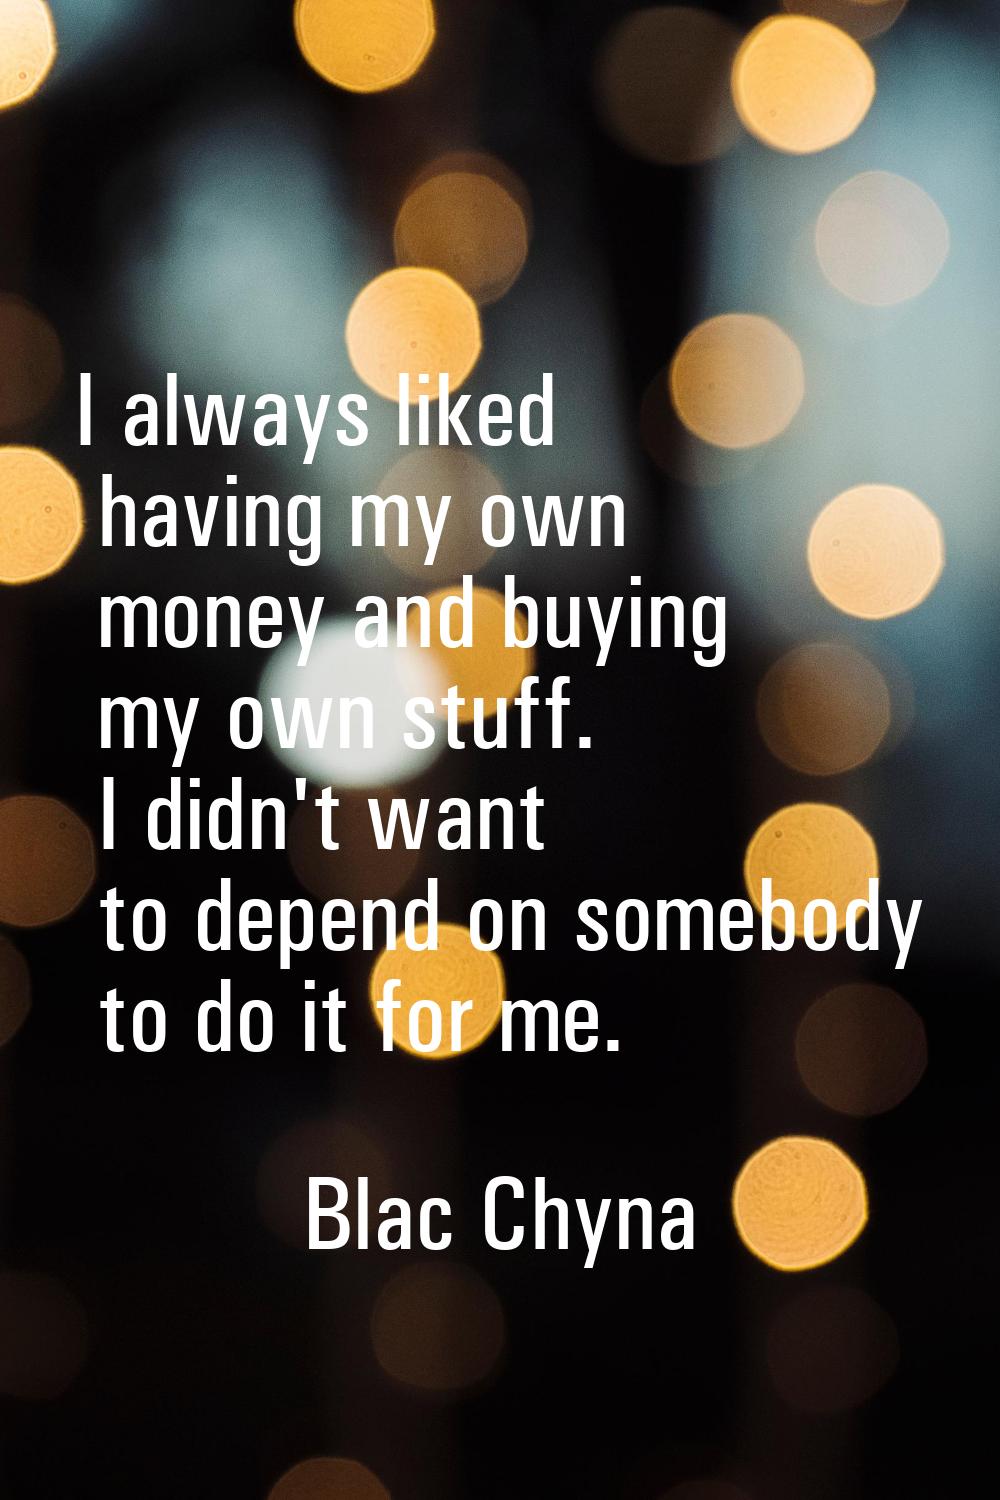 I always liked having my own money and buying my own stuff. I didn't want to depend on somebody to 